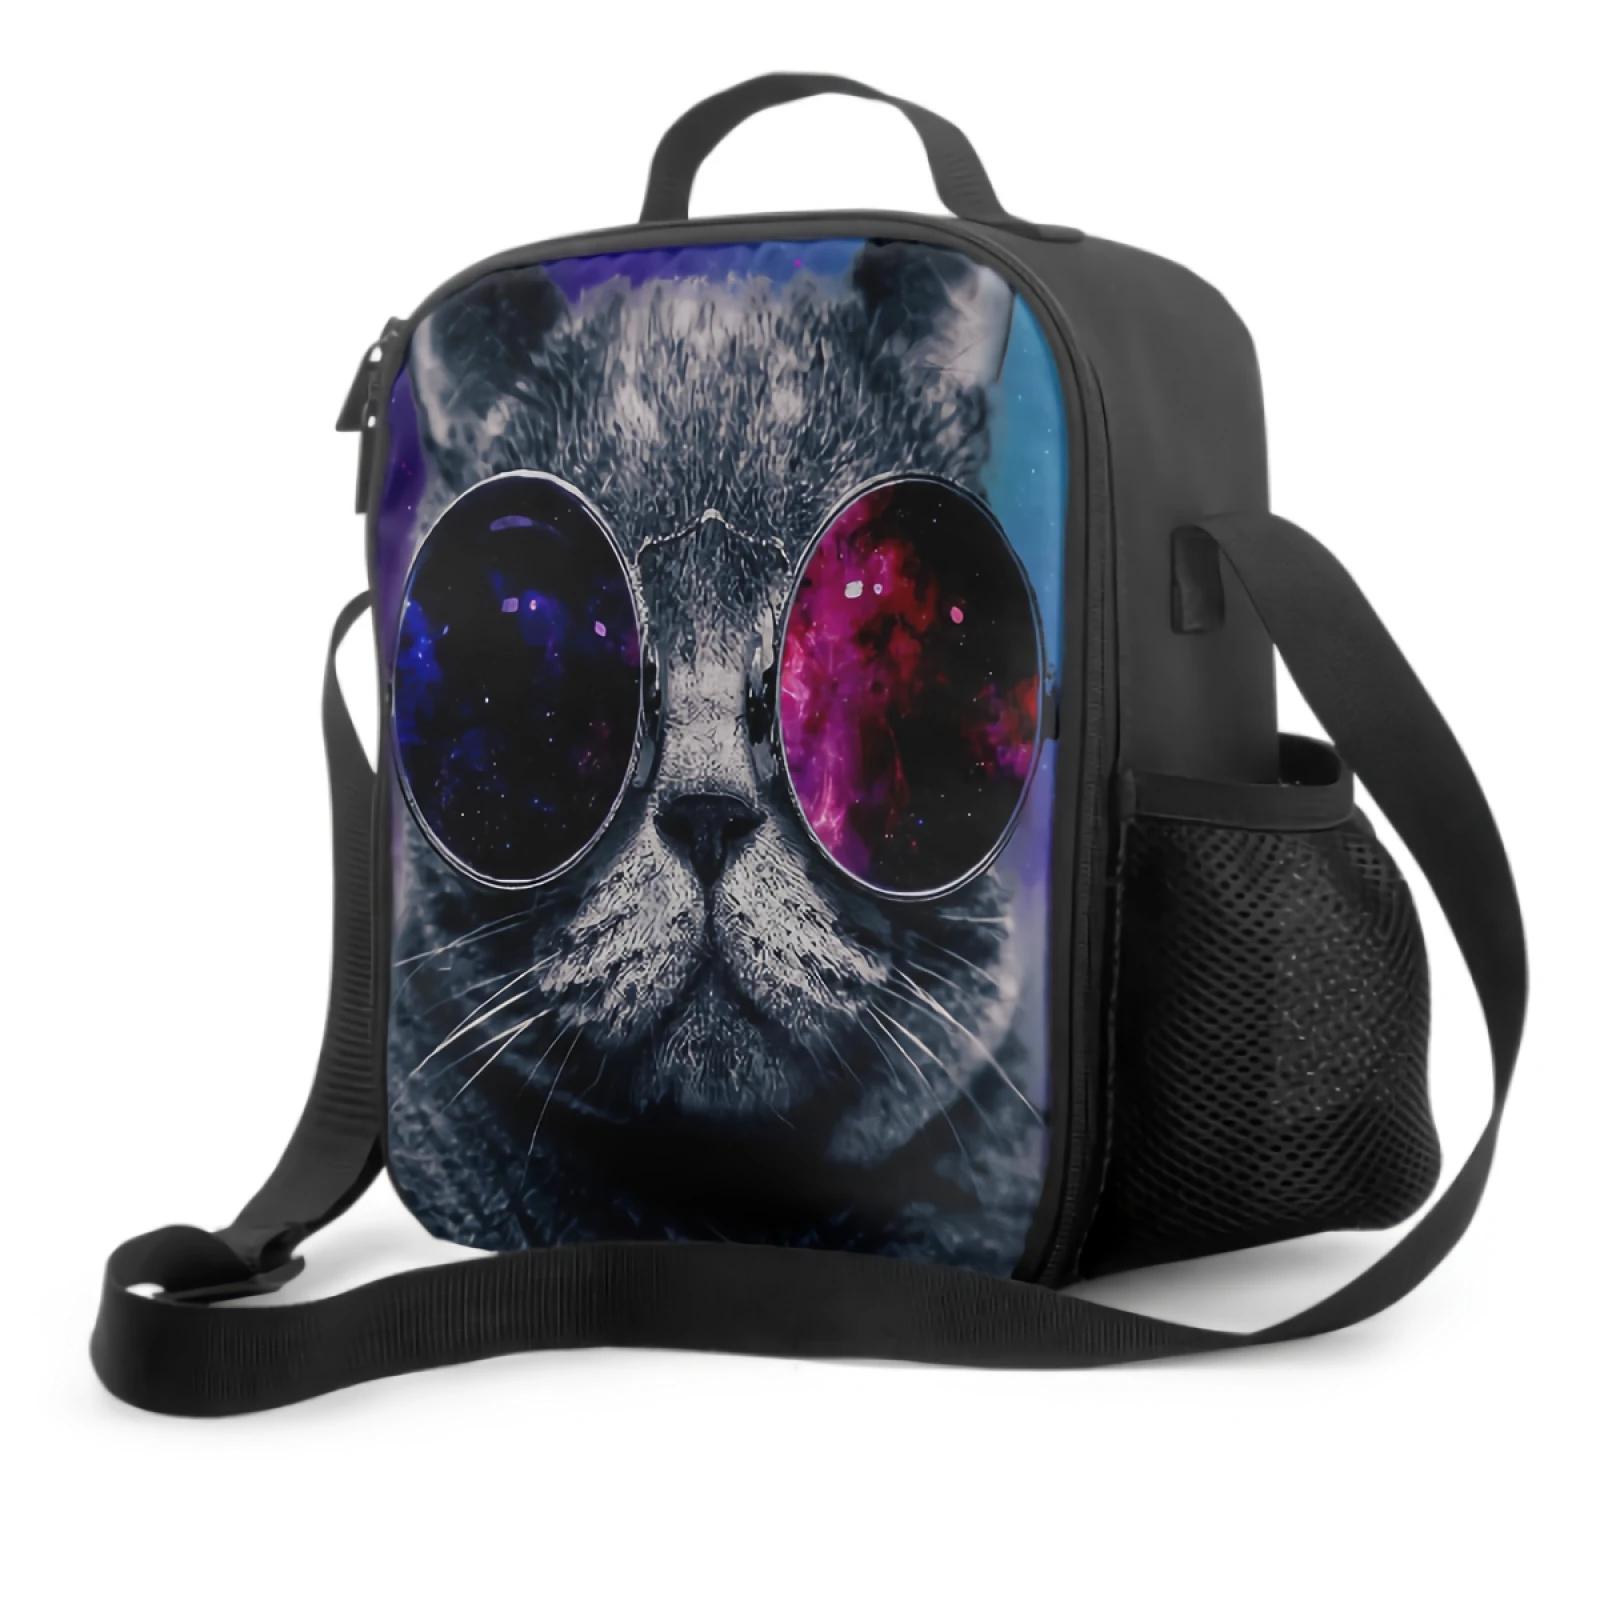 3D Colorful Cat In The Galaxy Nebula Sky Insulated Lunch Box for Kids Cooler Bag Thermal Lunch Container for Work Sc